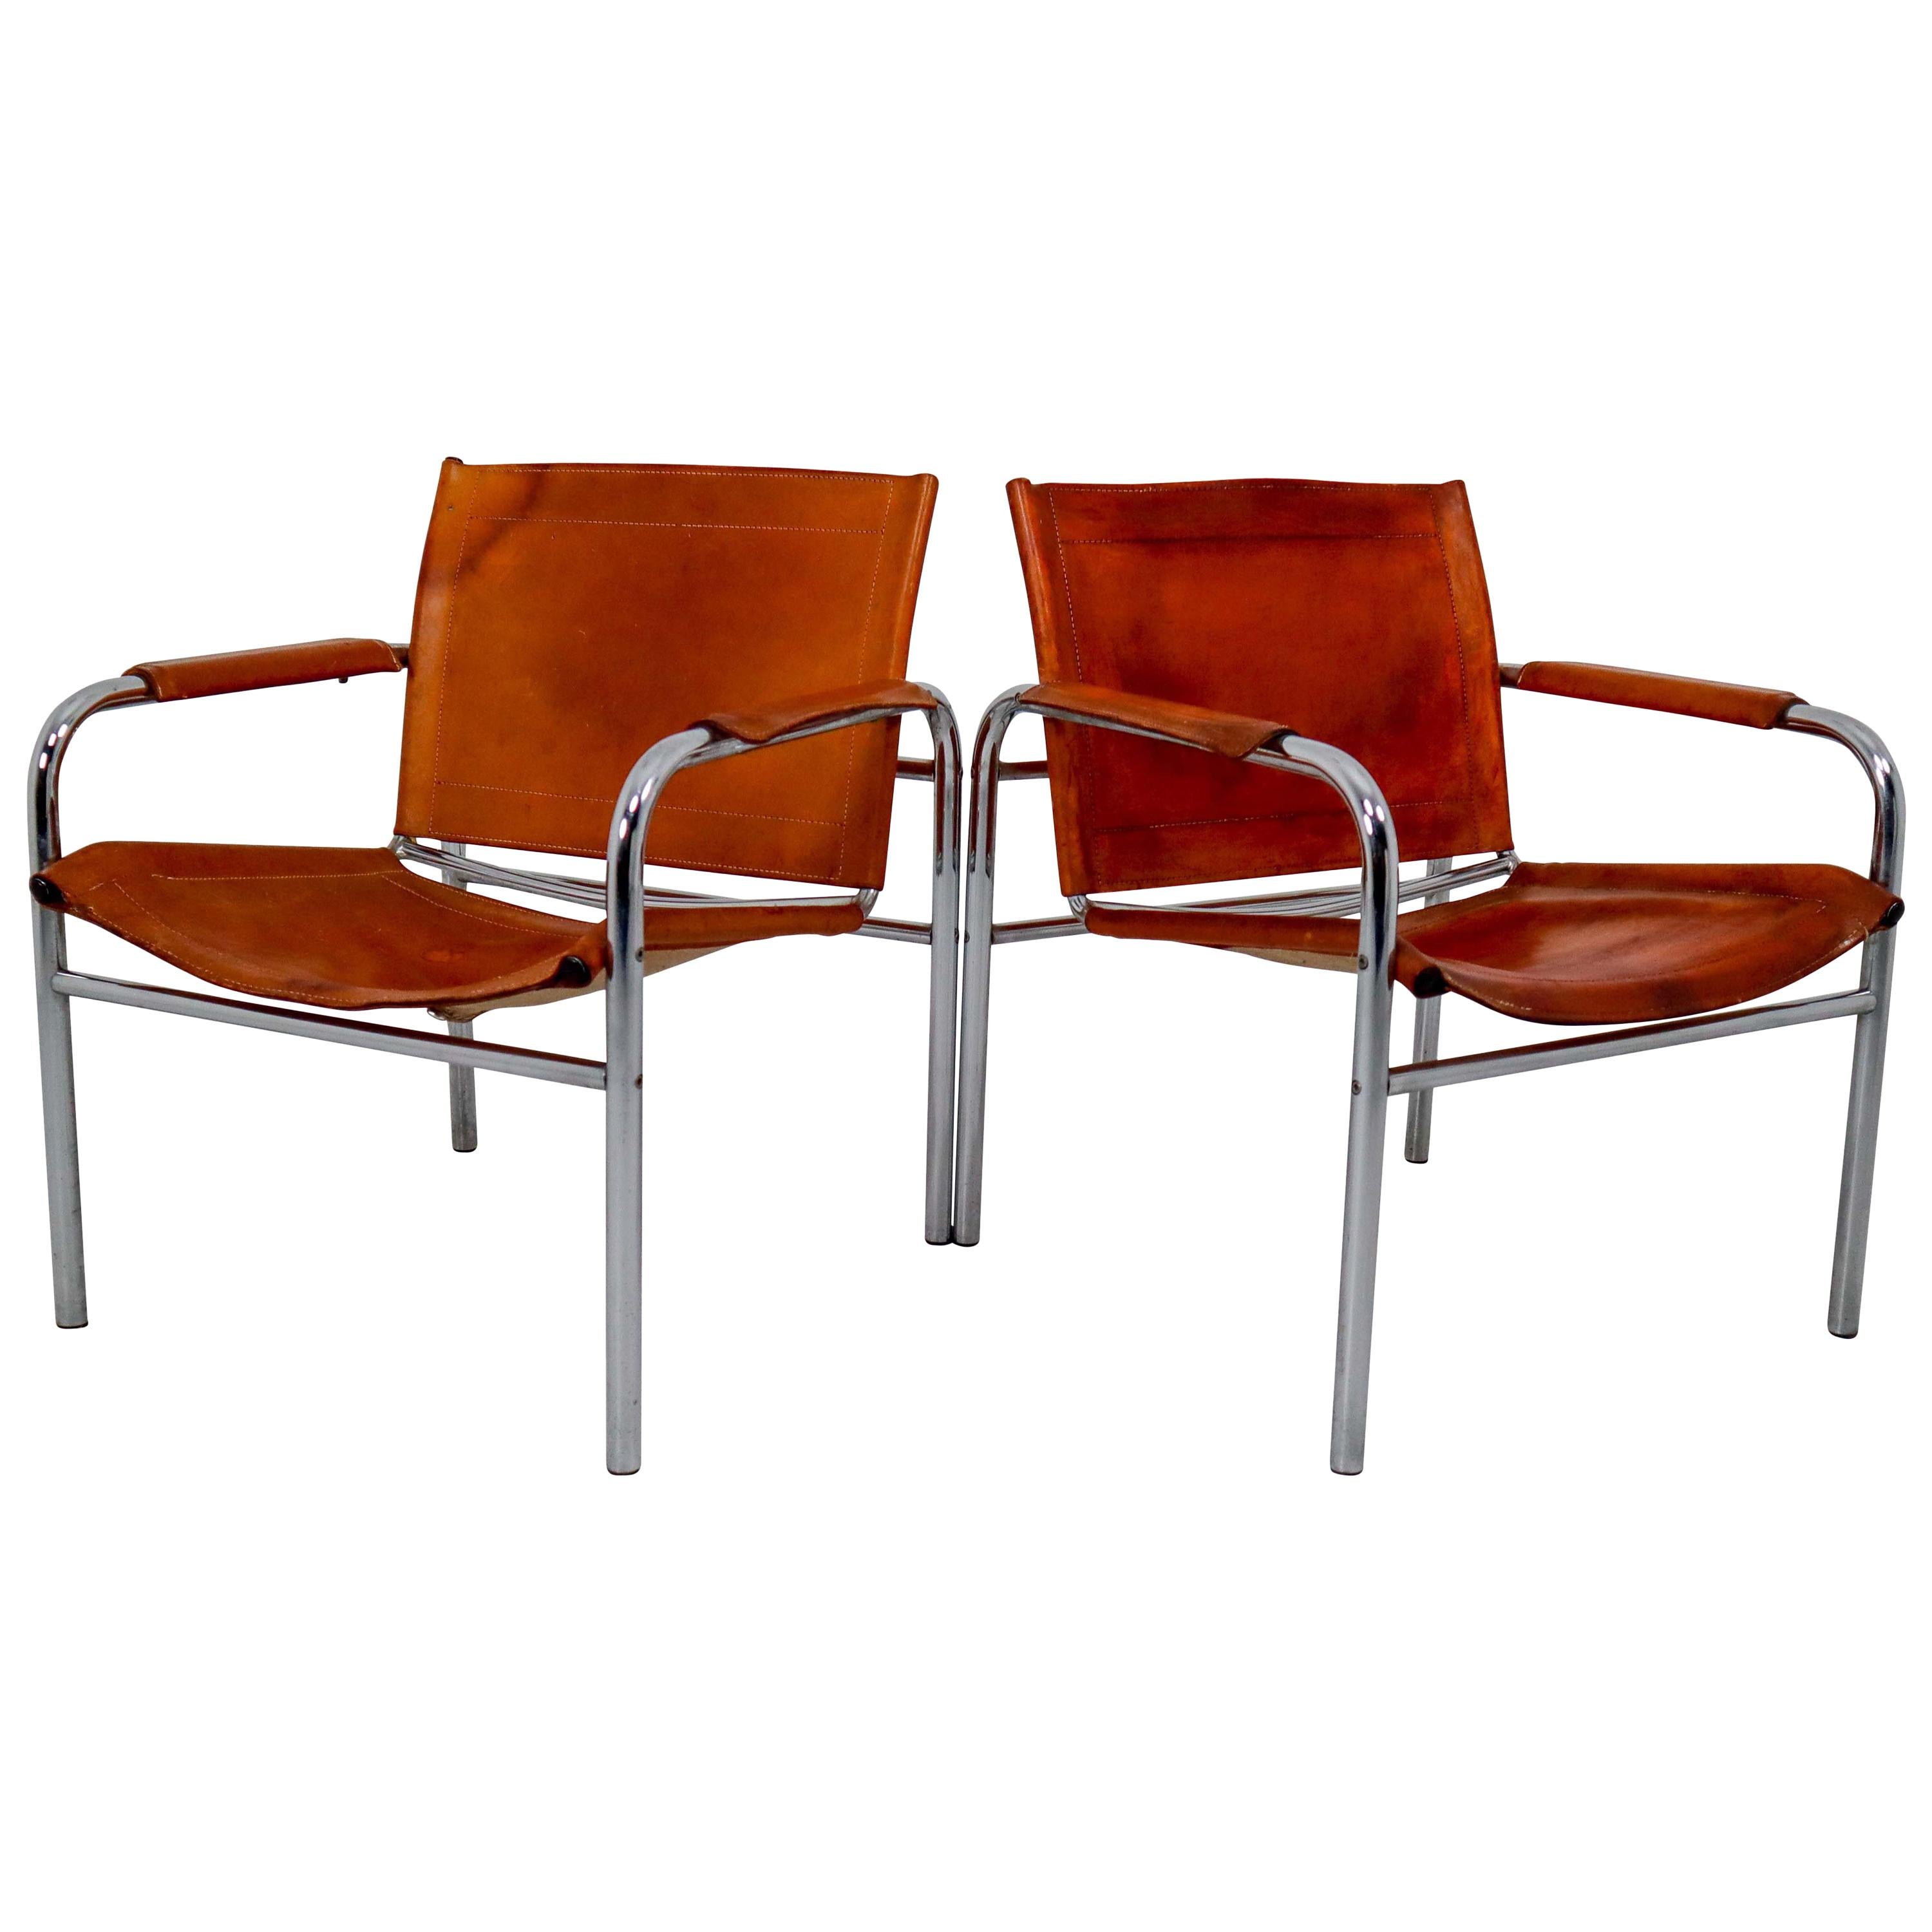 Two Midcentury Tubular Armchairs in Patinated Cognac Leather, France, 1960s